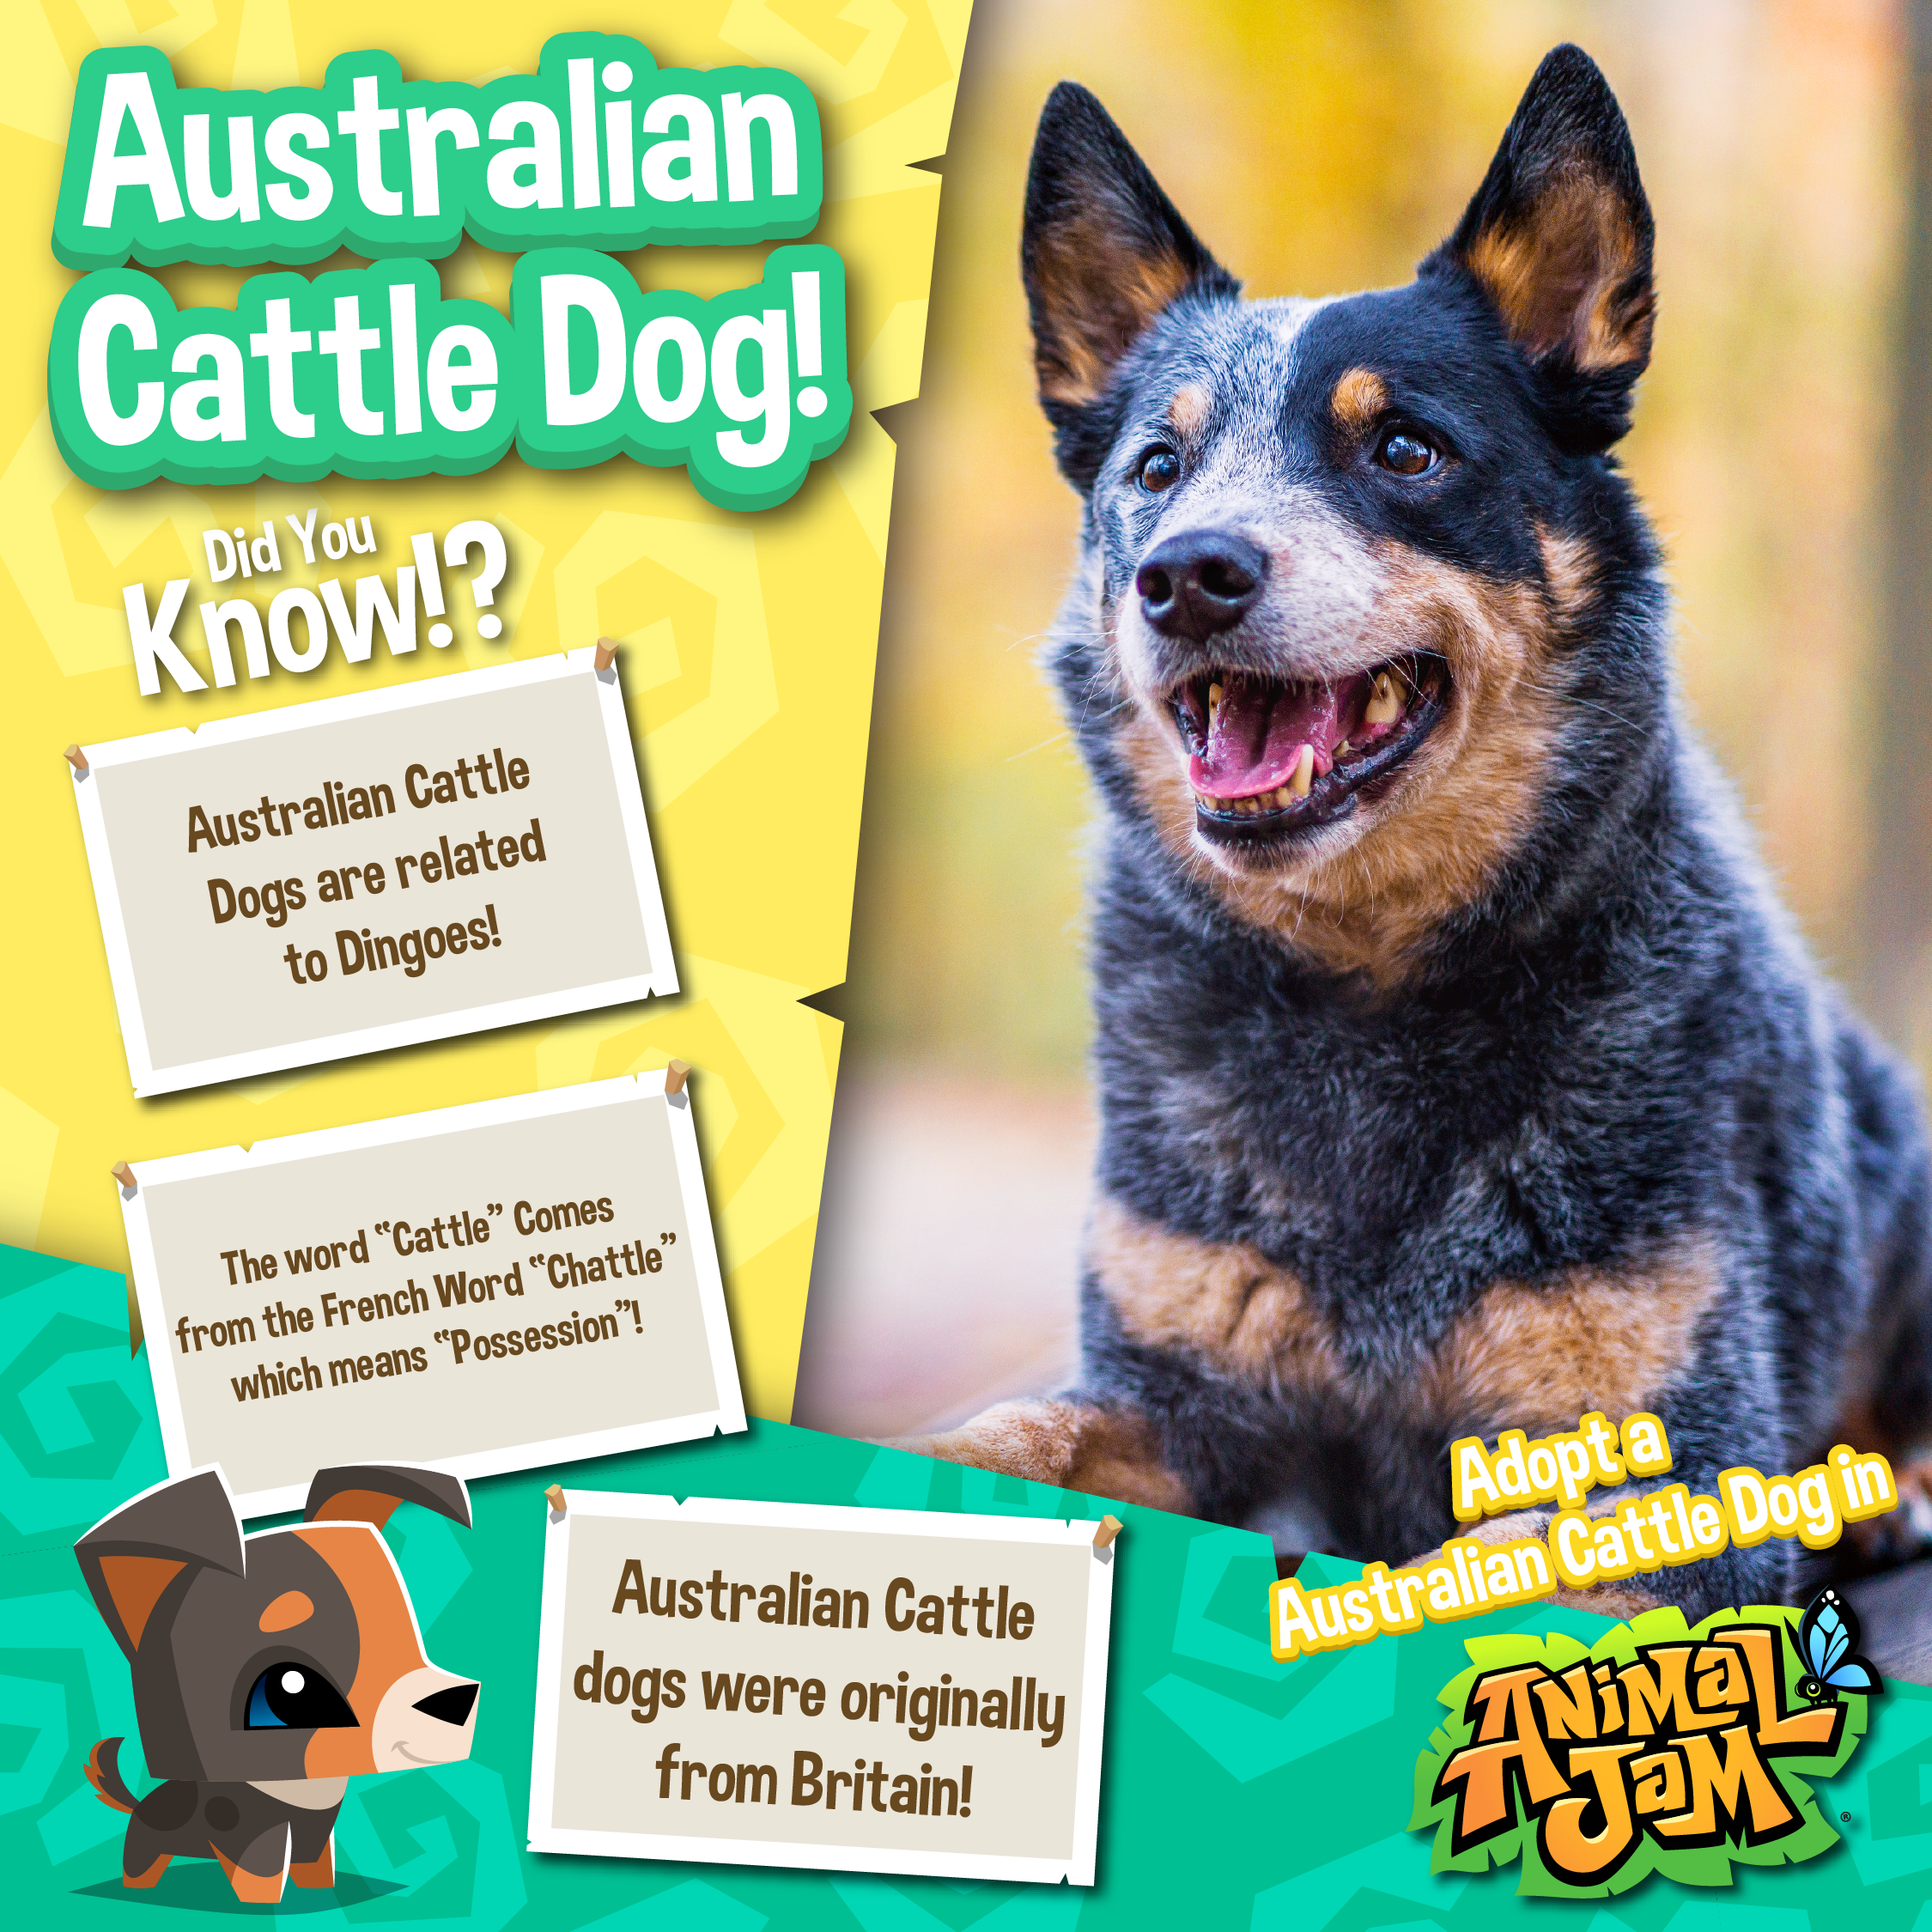 20221212 Real Live Animal Post Cow and Australian Cattle Dog-02